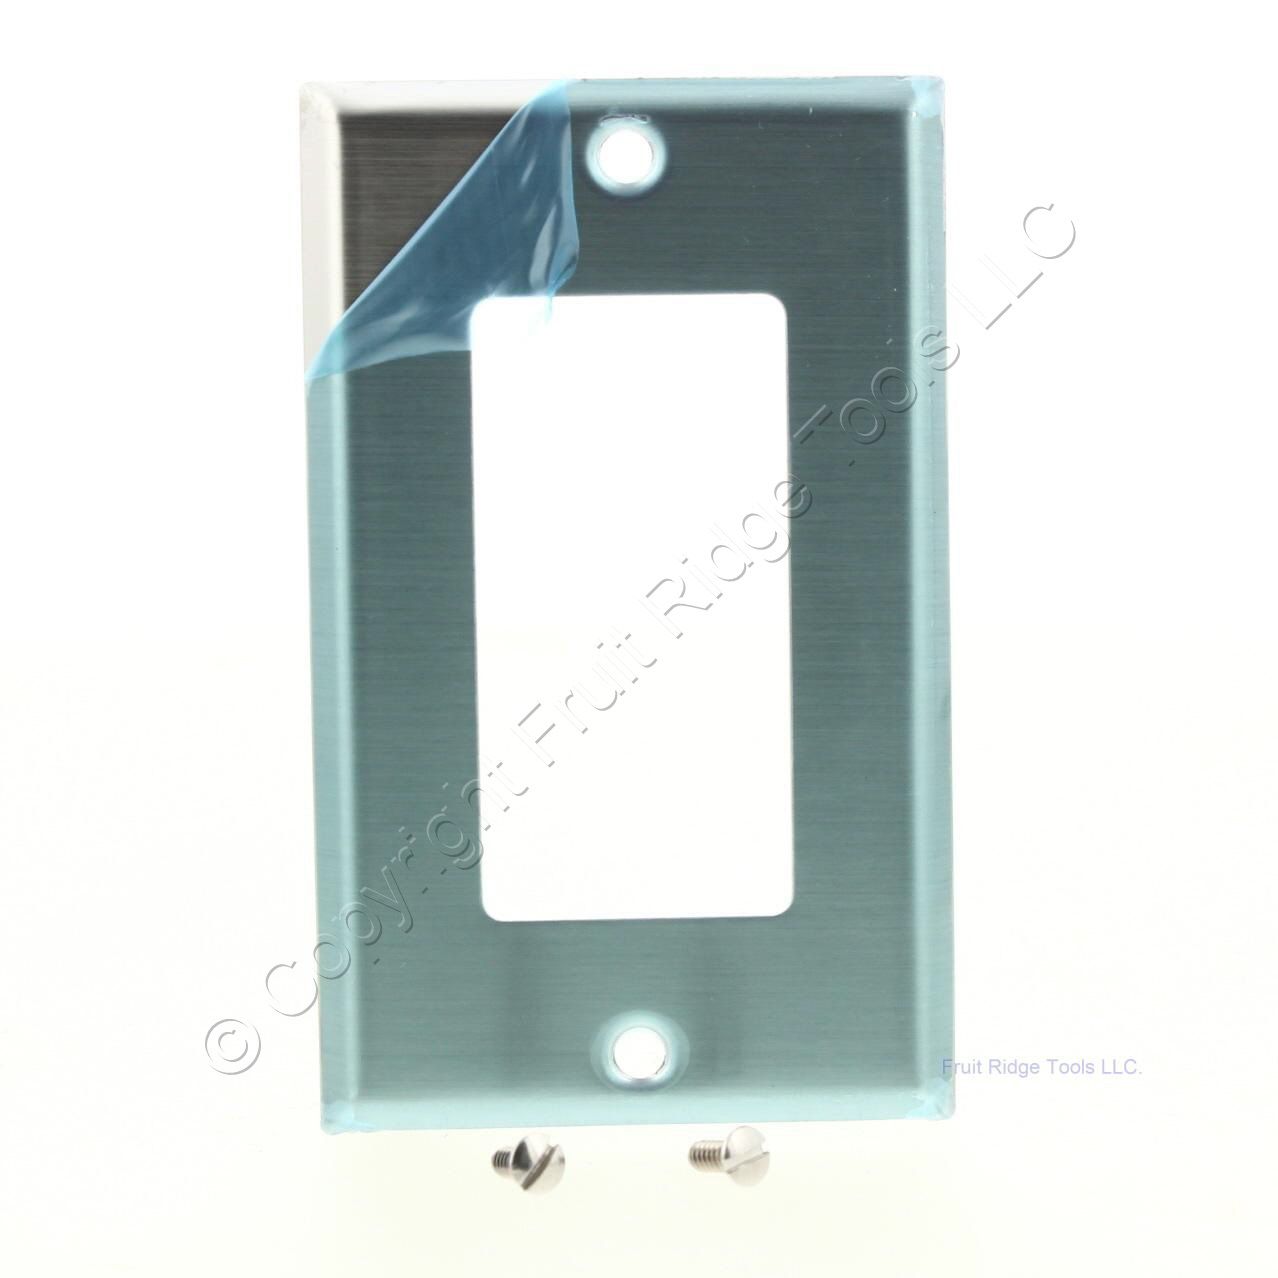 New Eaton NON-MAGNETIC Stainless Steel Decorator Wallplate C